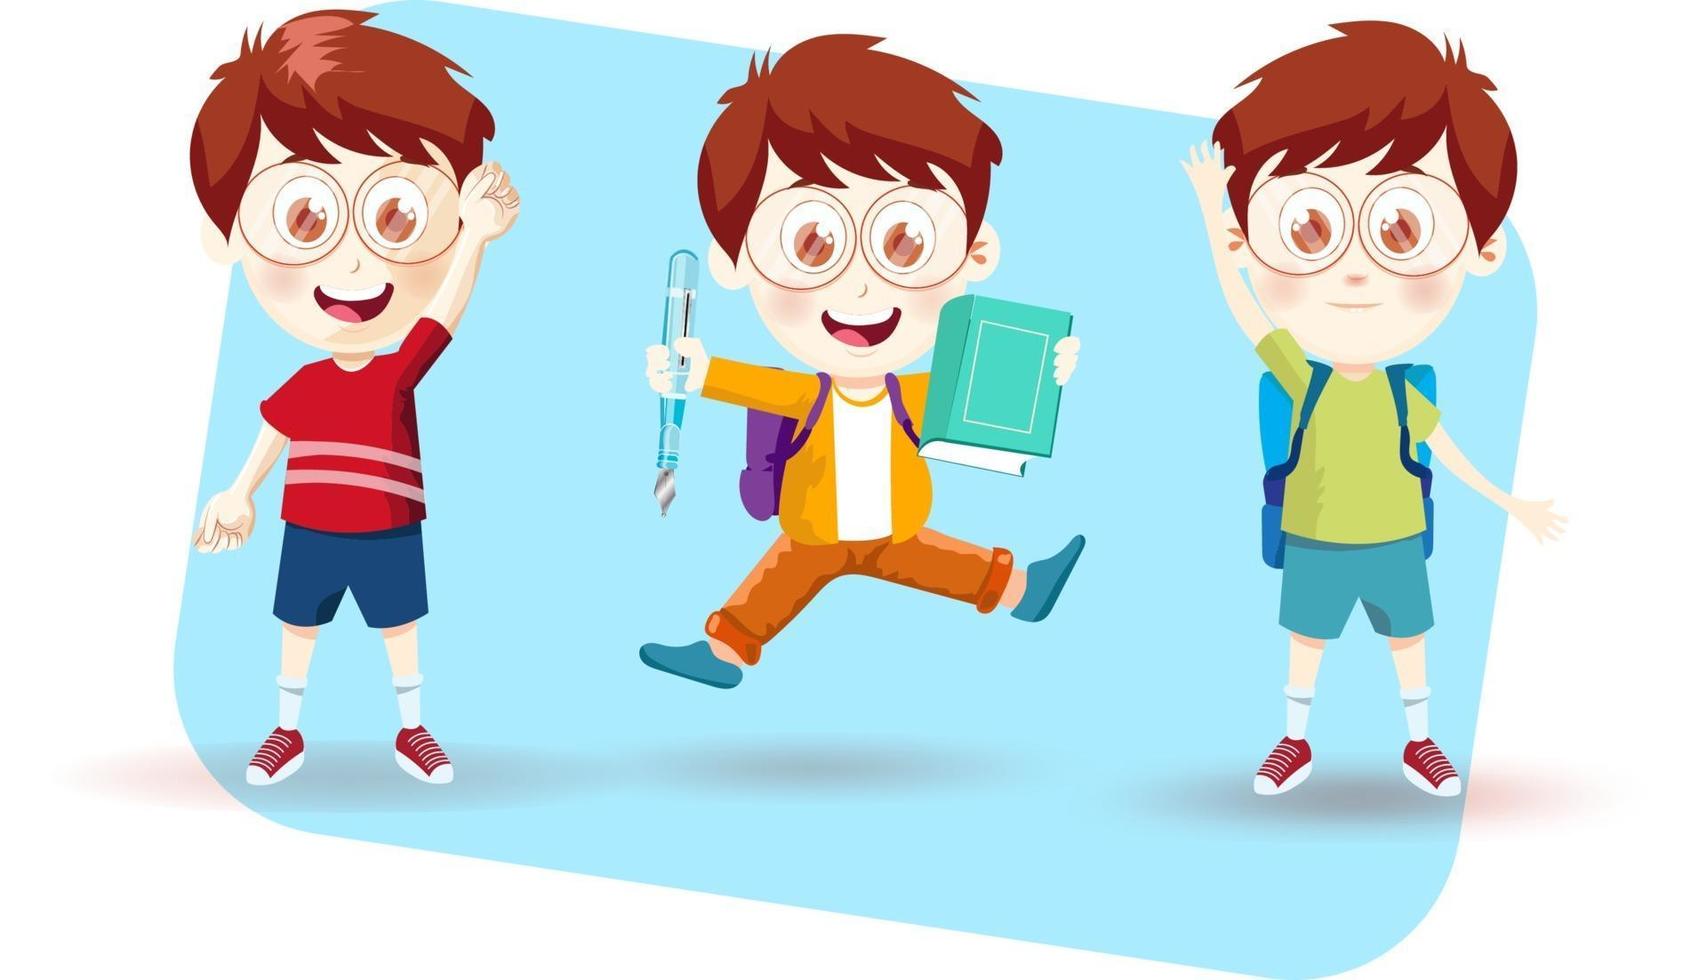 school student boy with different emotions vector illustration